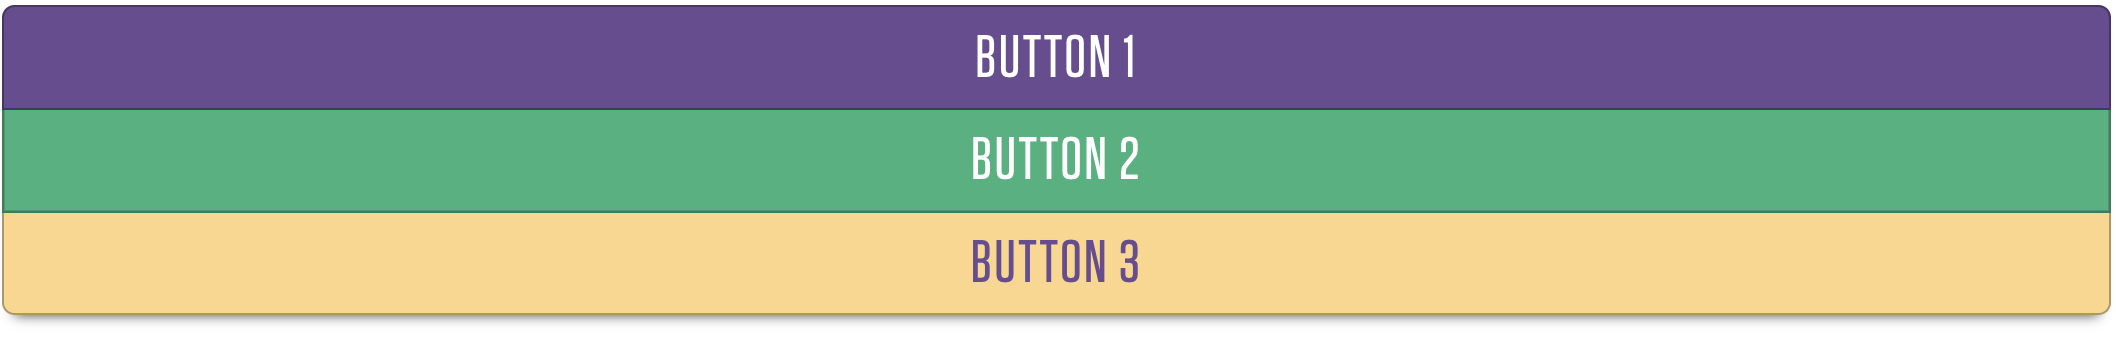 Button Groups